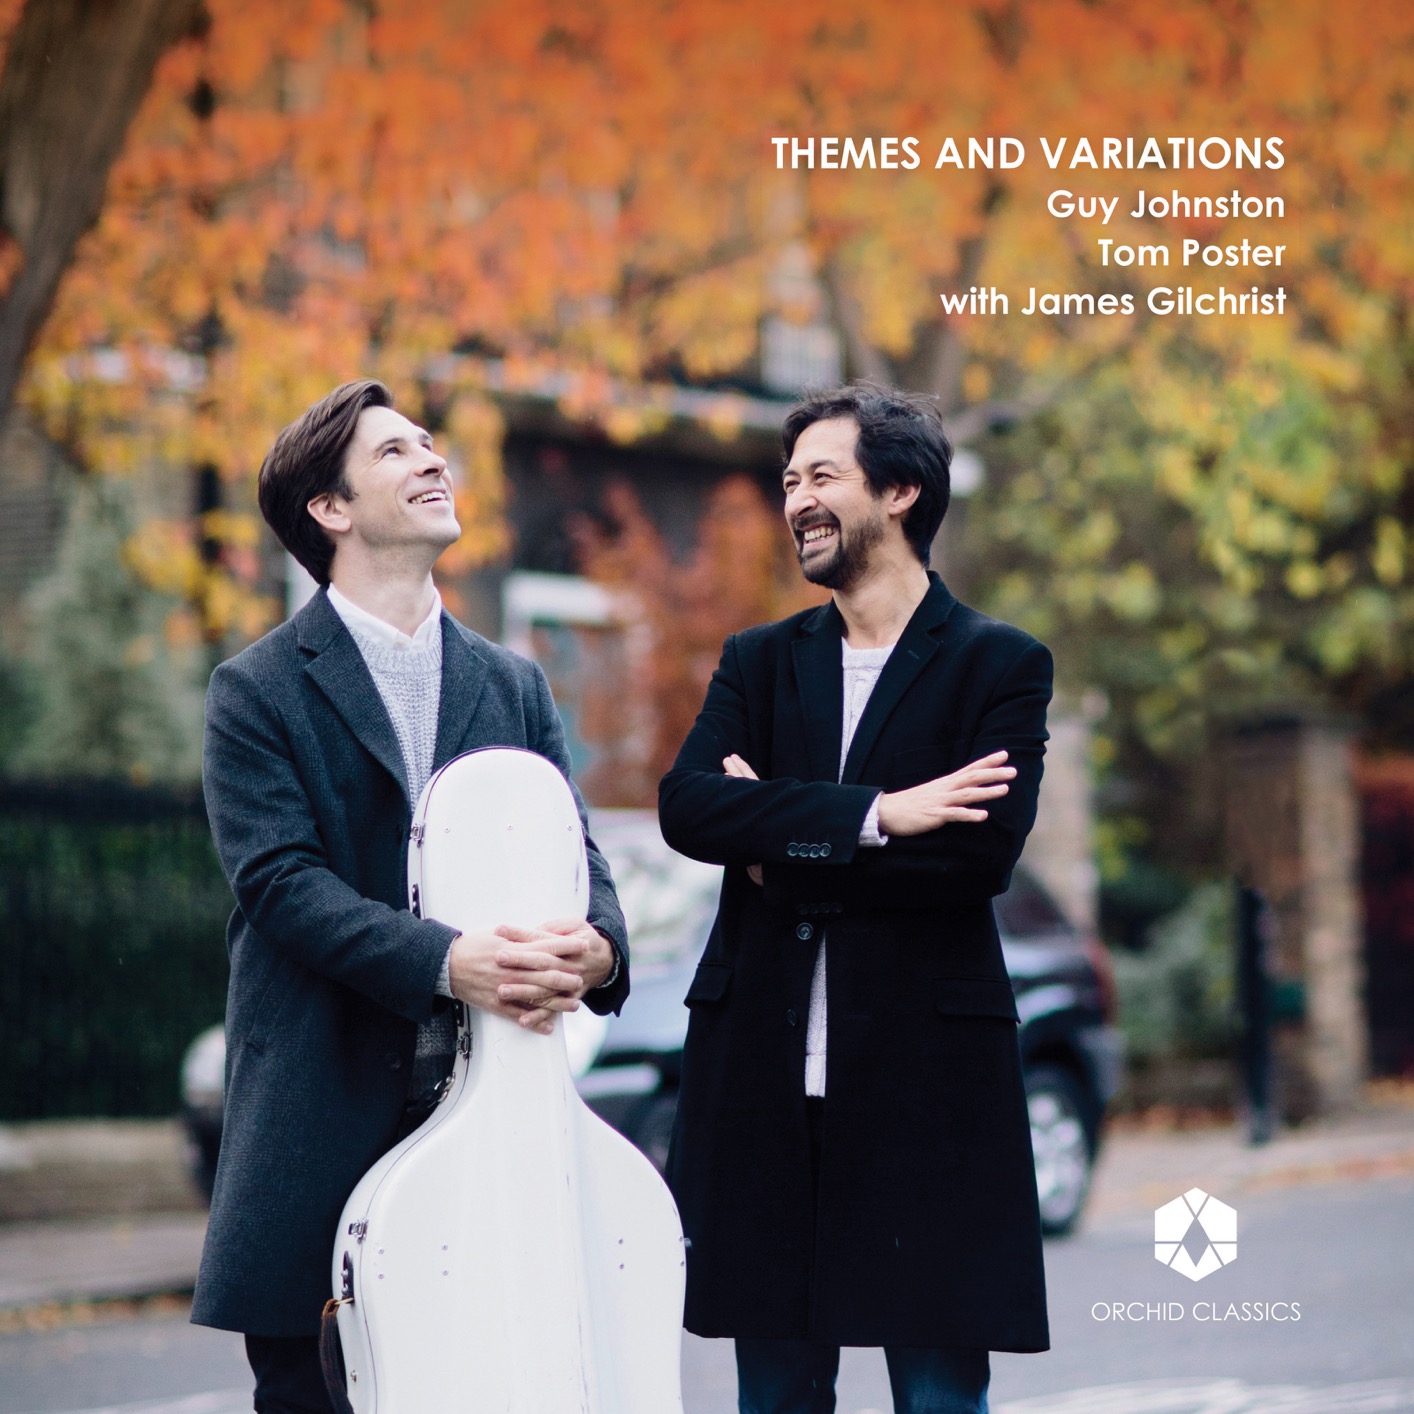 James Gilchrist, Tom Poster, Guy Johnston - Themes and Variations (2019) [FLAC 24bit/96kHz]